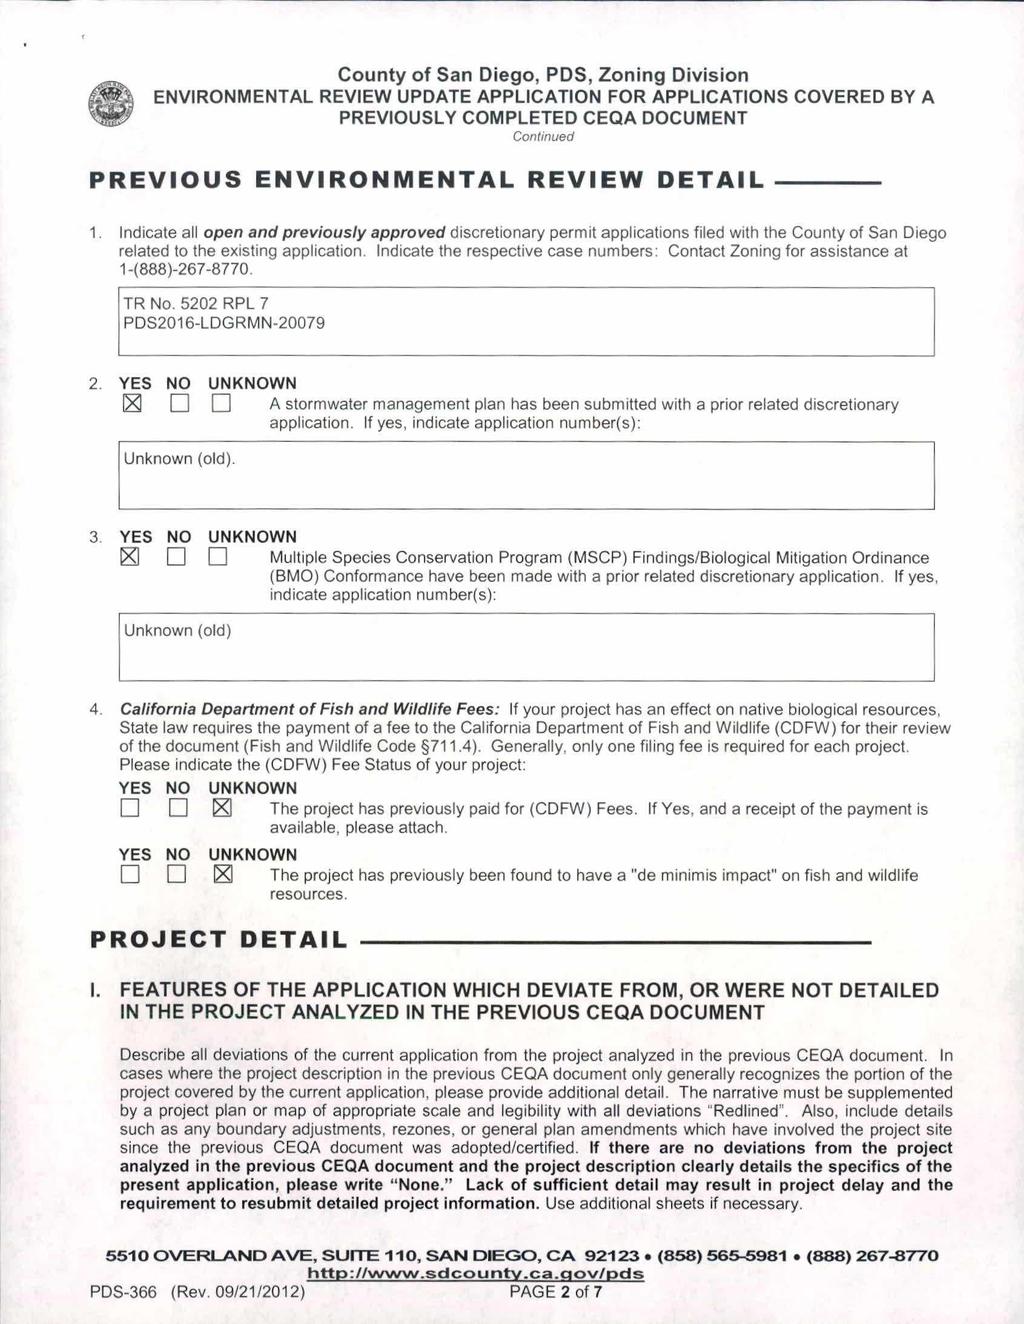 PREVIOUS ENVIRONMENTAL REVIEW DETAIL 1. Indicate all open and previously approved discretionary permit applications filed with the County of San Diego related to the existing application.